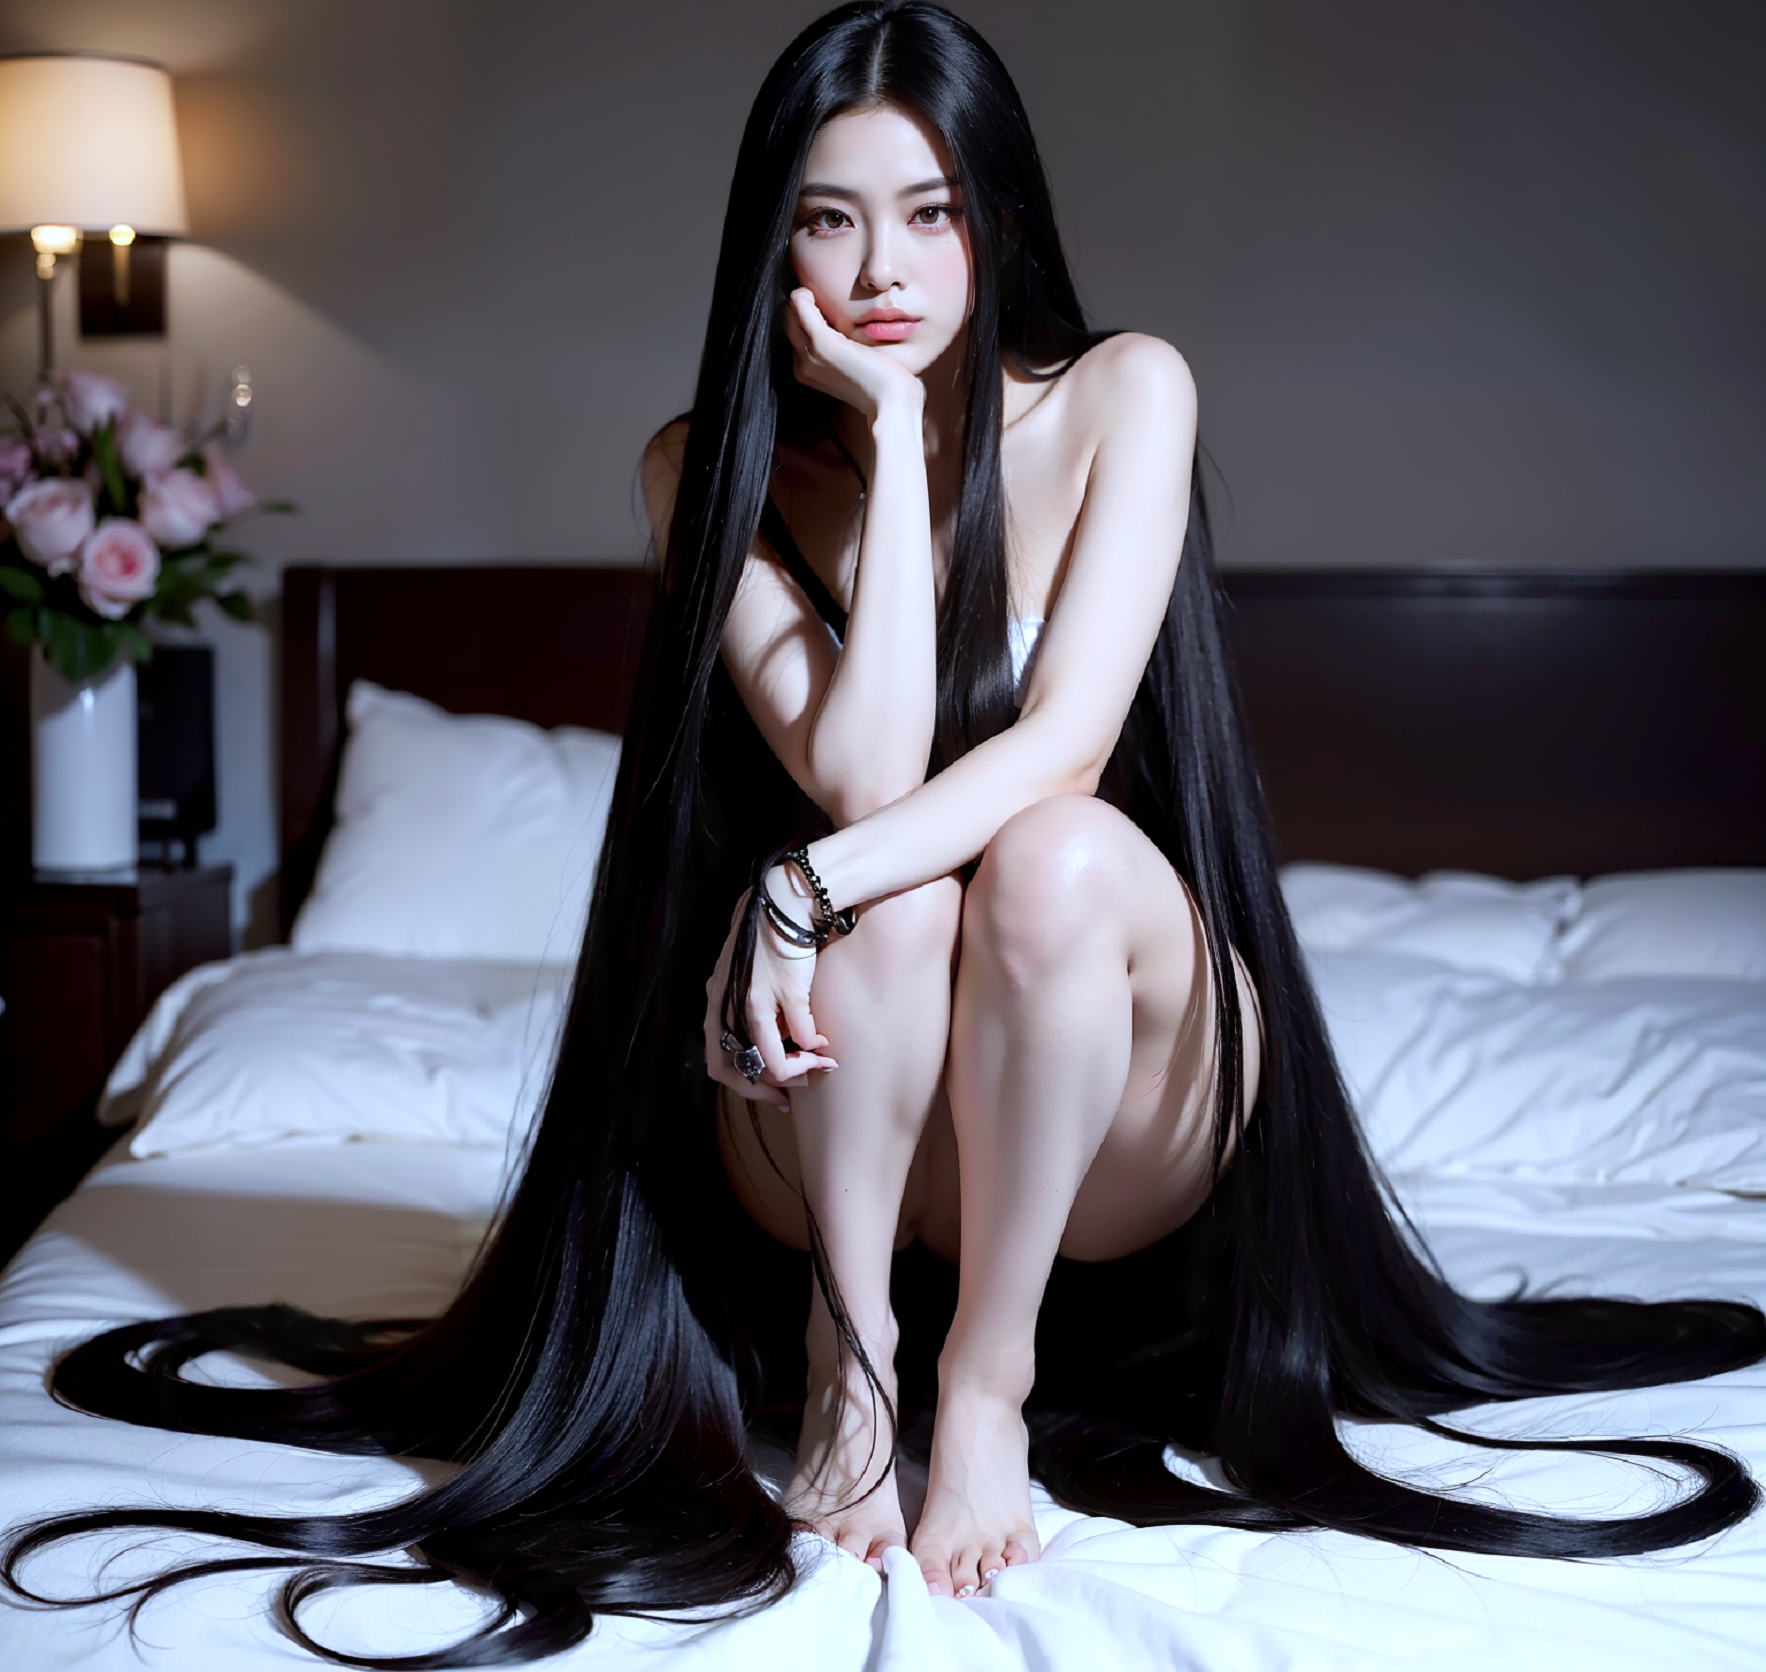 Female,Submissive,Hidemi takes pride in her long, beautiful black hair as her biggest charm point. Her hair captivates many men, but she only lets her boyfriend touch it.